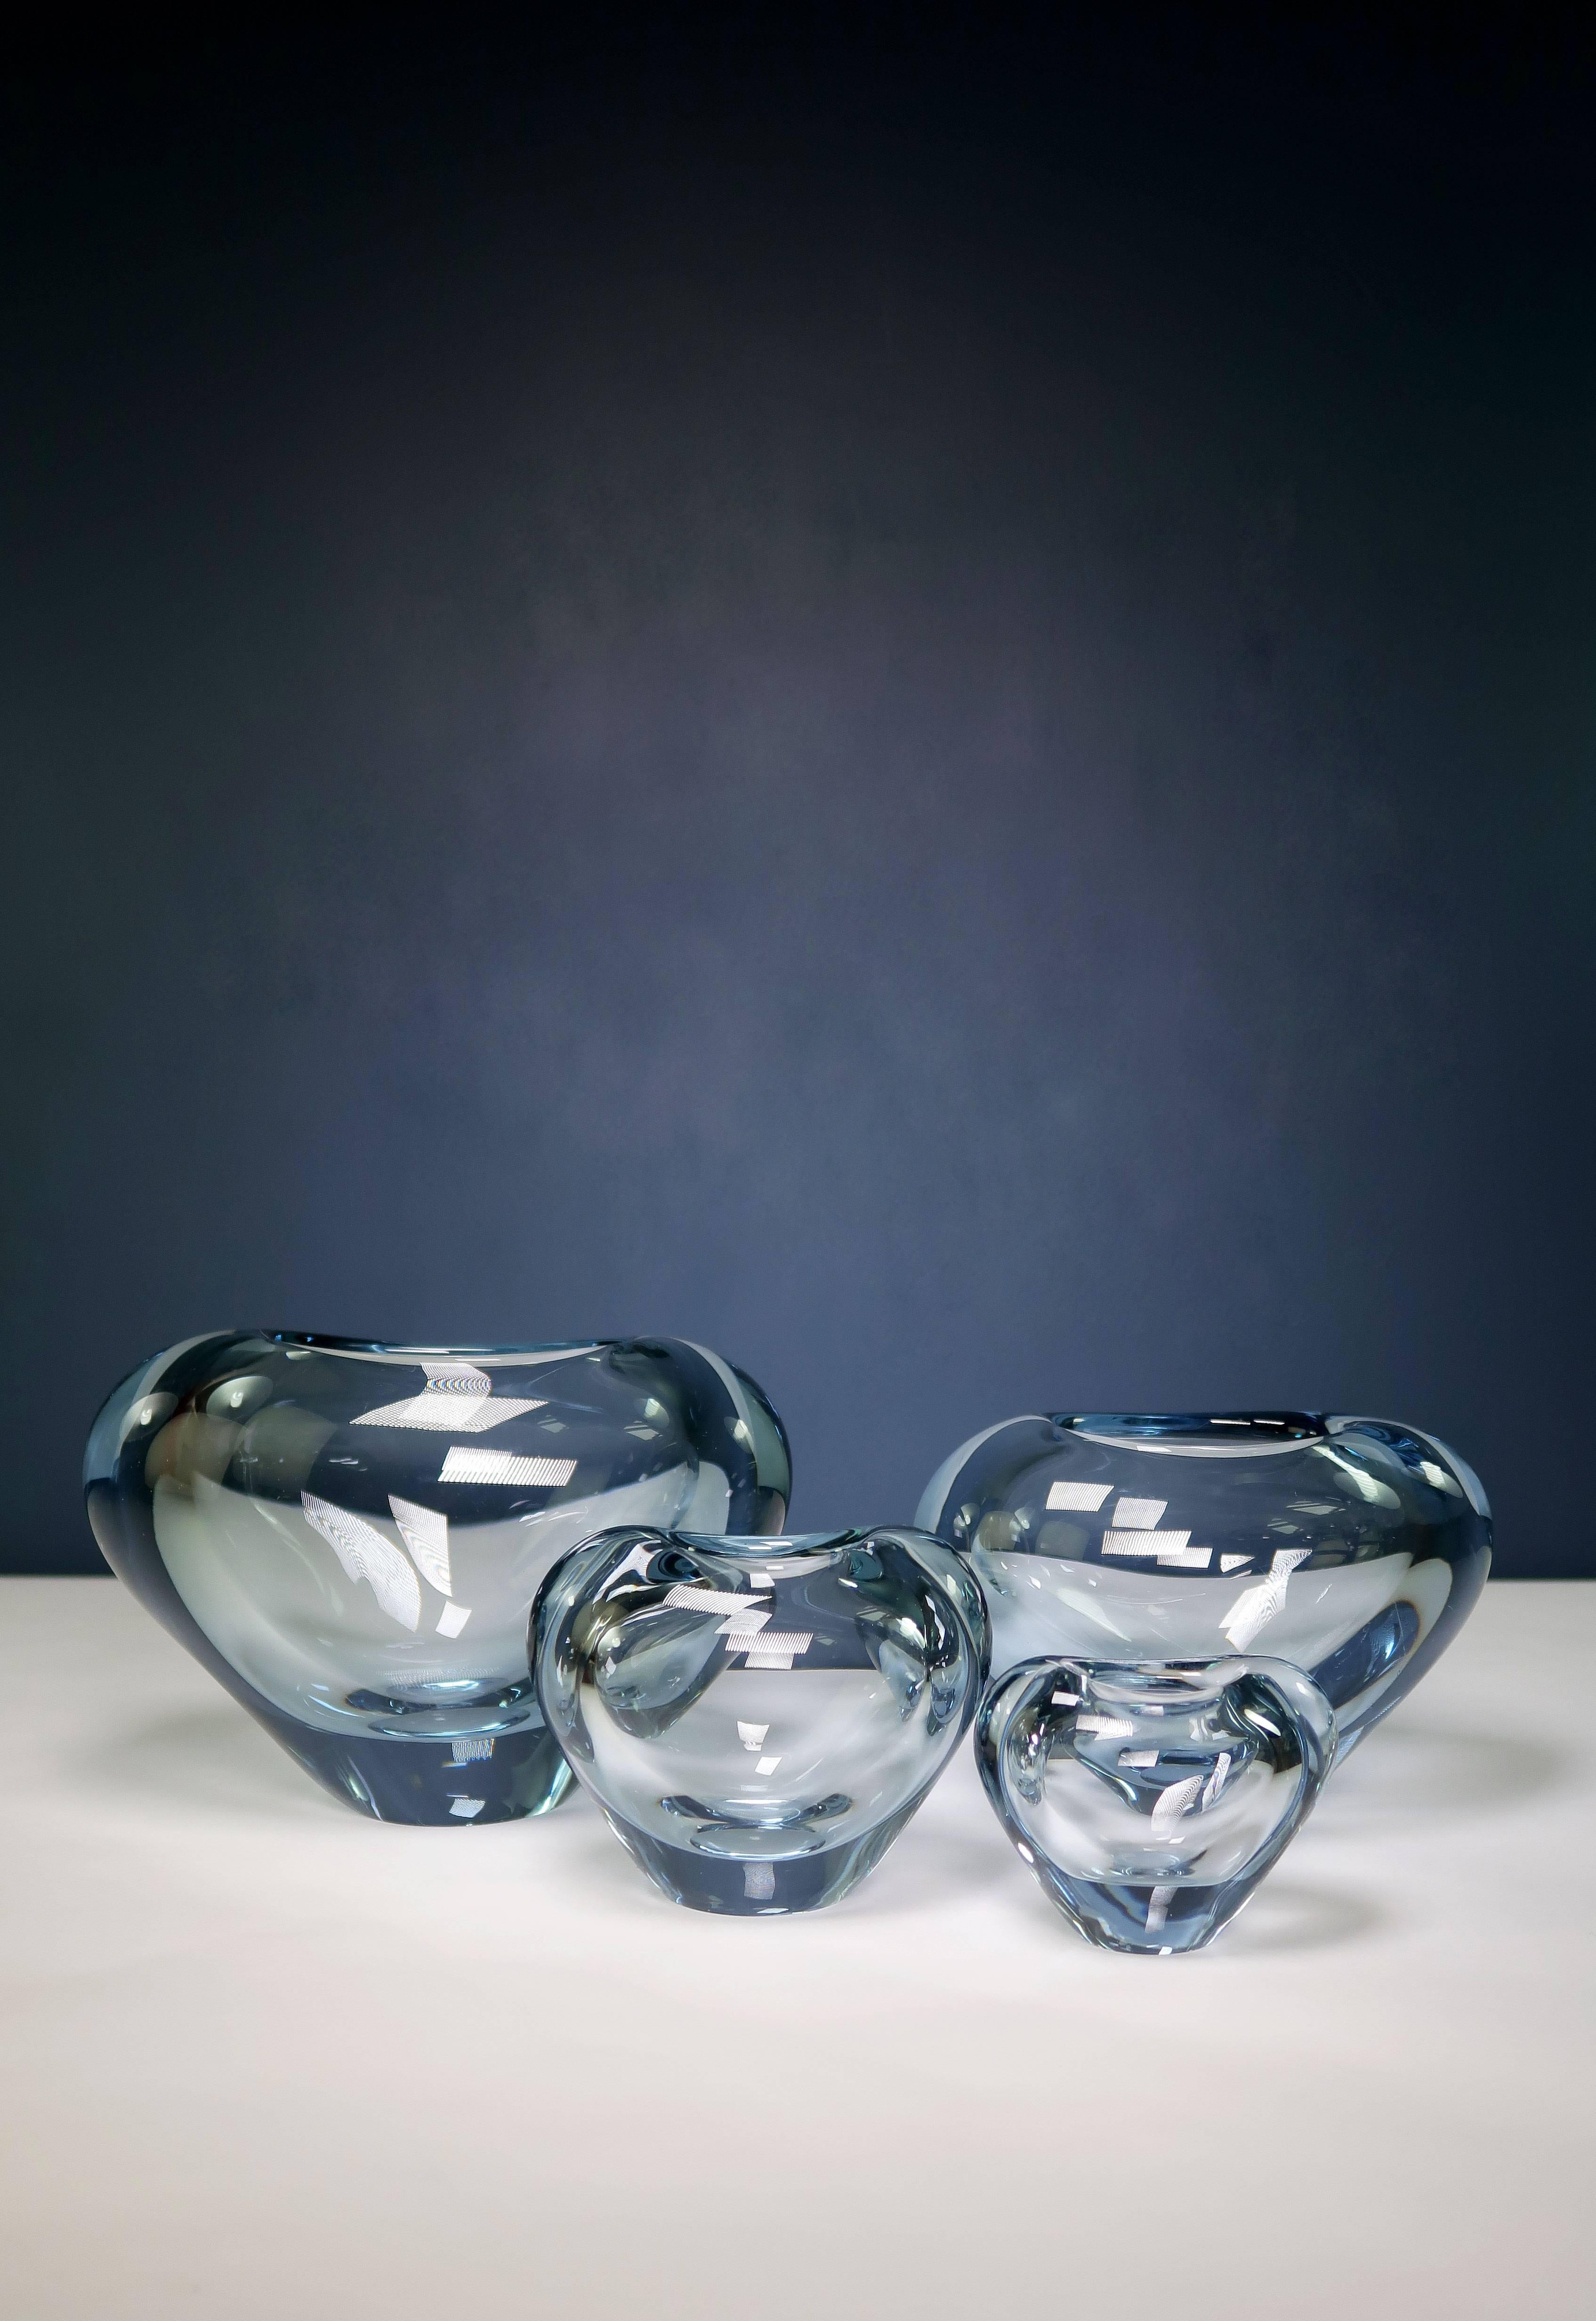 Four Danish Mid-Century Modern heart shaped vases in light blue hand blown art glass. All vases are intact and in beautiful and color-bright condition. By designer and artistic manager of Holmegaard Per Lütken (1916-1998). Manufactured in the